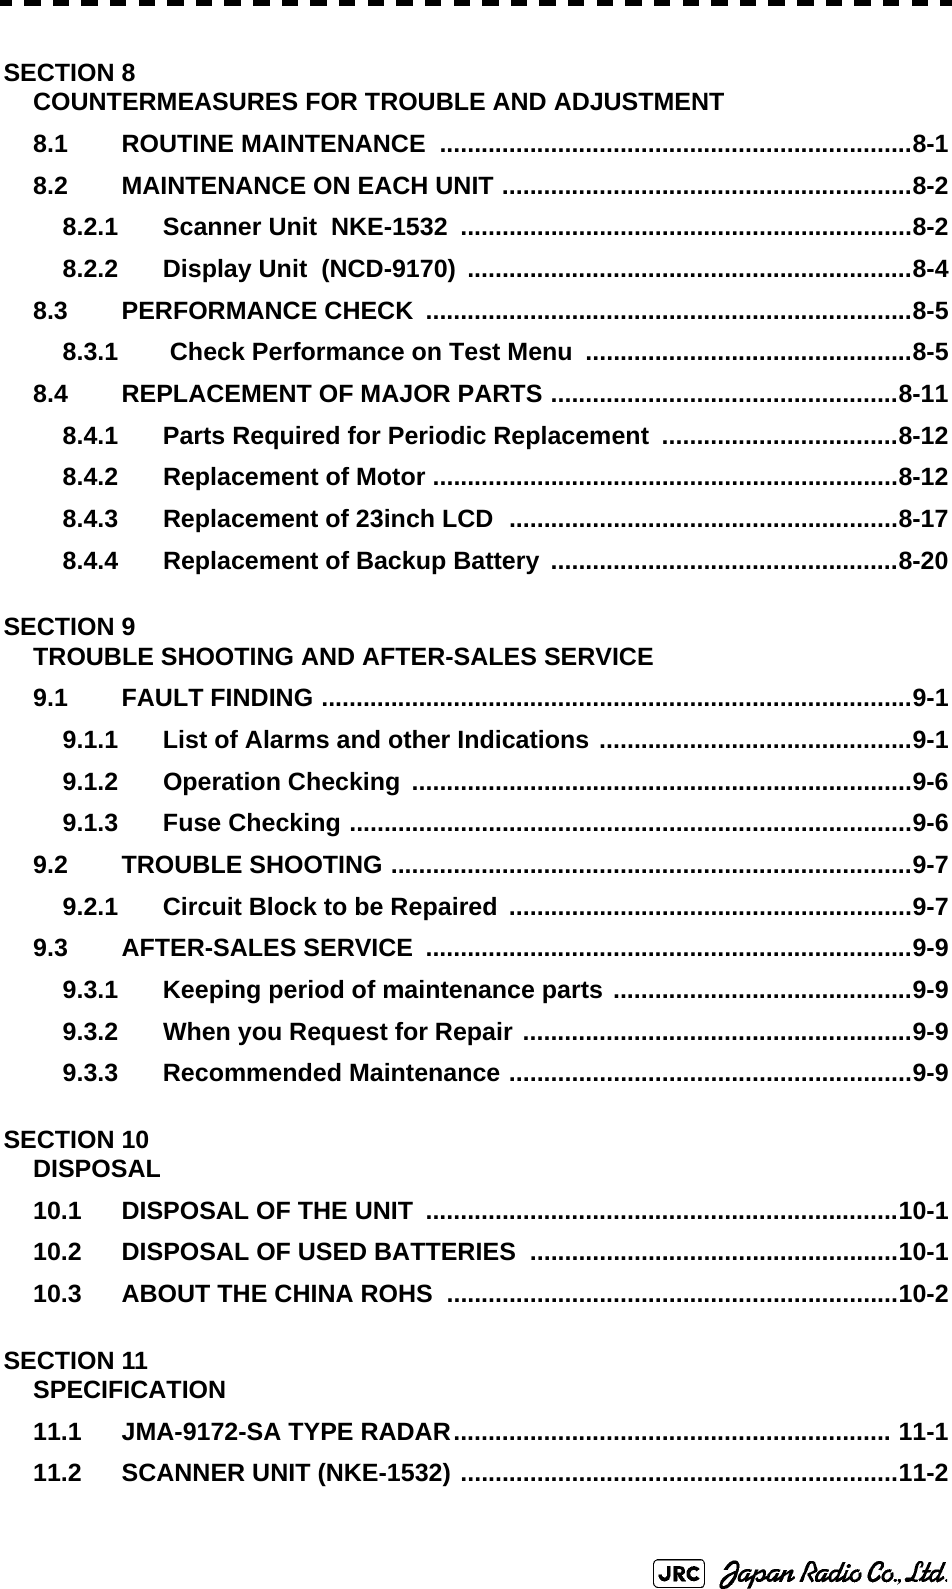 SECTION 8COUNTERMEASURES FOR TROUBLE AND ADJUSTMENT8.1 ROUTINE MAINTENANCE  ....................................................................8-18.2 MAINTENANCE ON EACH UNIT ...........................................................8-28.2.1 Scanner Unit  NKE-1532  .................................................................8-28.2.2 Display Unit  (NCD-9170) ................................................................8-48.3 PERFORMANCE CHECK  ......................................................................8-58.3.1  Check Performance on Test Menu  ...............................................8-58.4 REPLACEMENT OF MAJOR PARTS ..................................................8-118.4.1 Parts Required for Periodic Replacement ..................................8-128.4.2 Replacement of Motor ...................................................................8-128.4.3 Replacement of 23inch LCD  ........................................................8-178.4.4 Replacement of Backup Battery ..................................................8-20SECTION 9TROUBLE SHOOTING AND AFTER-SALES SERVICE9.1 FAULT FINDING .....................................................................................9-19.1.1 List of Alarms and other Indications .............................................9-19.1.2 Operation Checking ........................................................................9-69.1.3 Fuse Checking .................................................................................9-69.2 TROUBLE SHOOTING ...........................................................................9-79.2.1 Circuit Block to be Repaired ..........................................................9-79.3 AFTER-SALES SERVICE  ......................................................................9-99.3.1 Keeping period of maintenance parts ...........................................9-99.3.2 When you Request for Repair ........................................................9-99.3.3 Recommended Maintenance ..........................................................9-9SECTION 10DISPOSAL10.1 DISPOSAL OF THE UNIT ....................................................................10-110.2 DISPOSAL OF USED BATTERIES .....................................................10-110.3 ABOUT THE CHINA ROHS  .................................................................10-2SECTION 11SPECIFICATION11.1 JMA-9172-SA TYPE RADAR............................................................... 11-111.2 SCANNER UNIT (NKE-1532) ...............................................................11-2